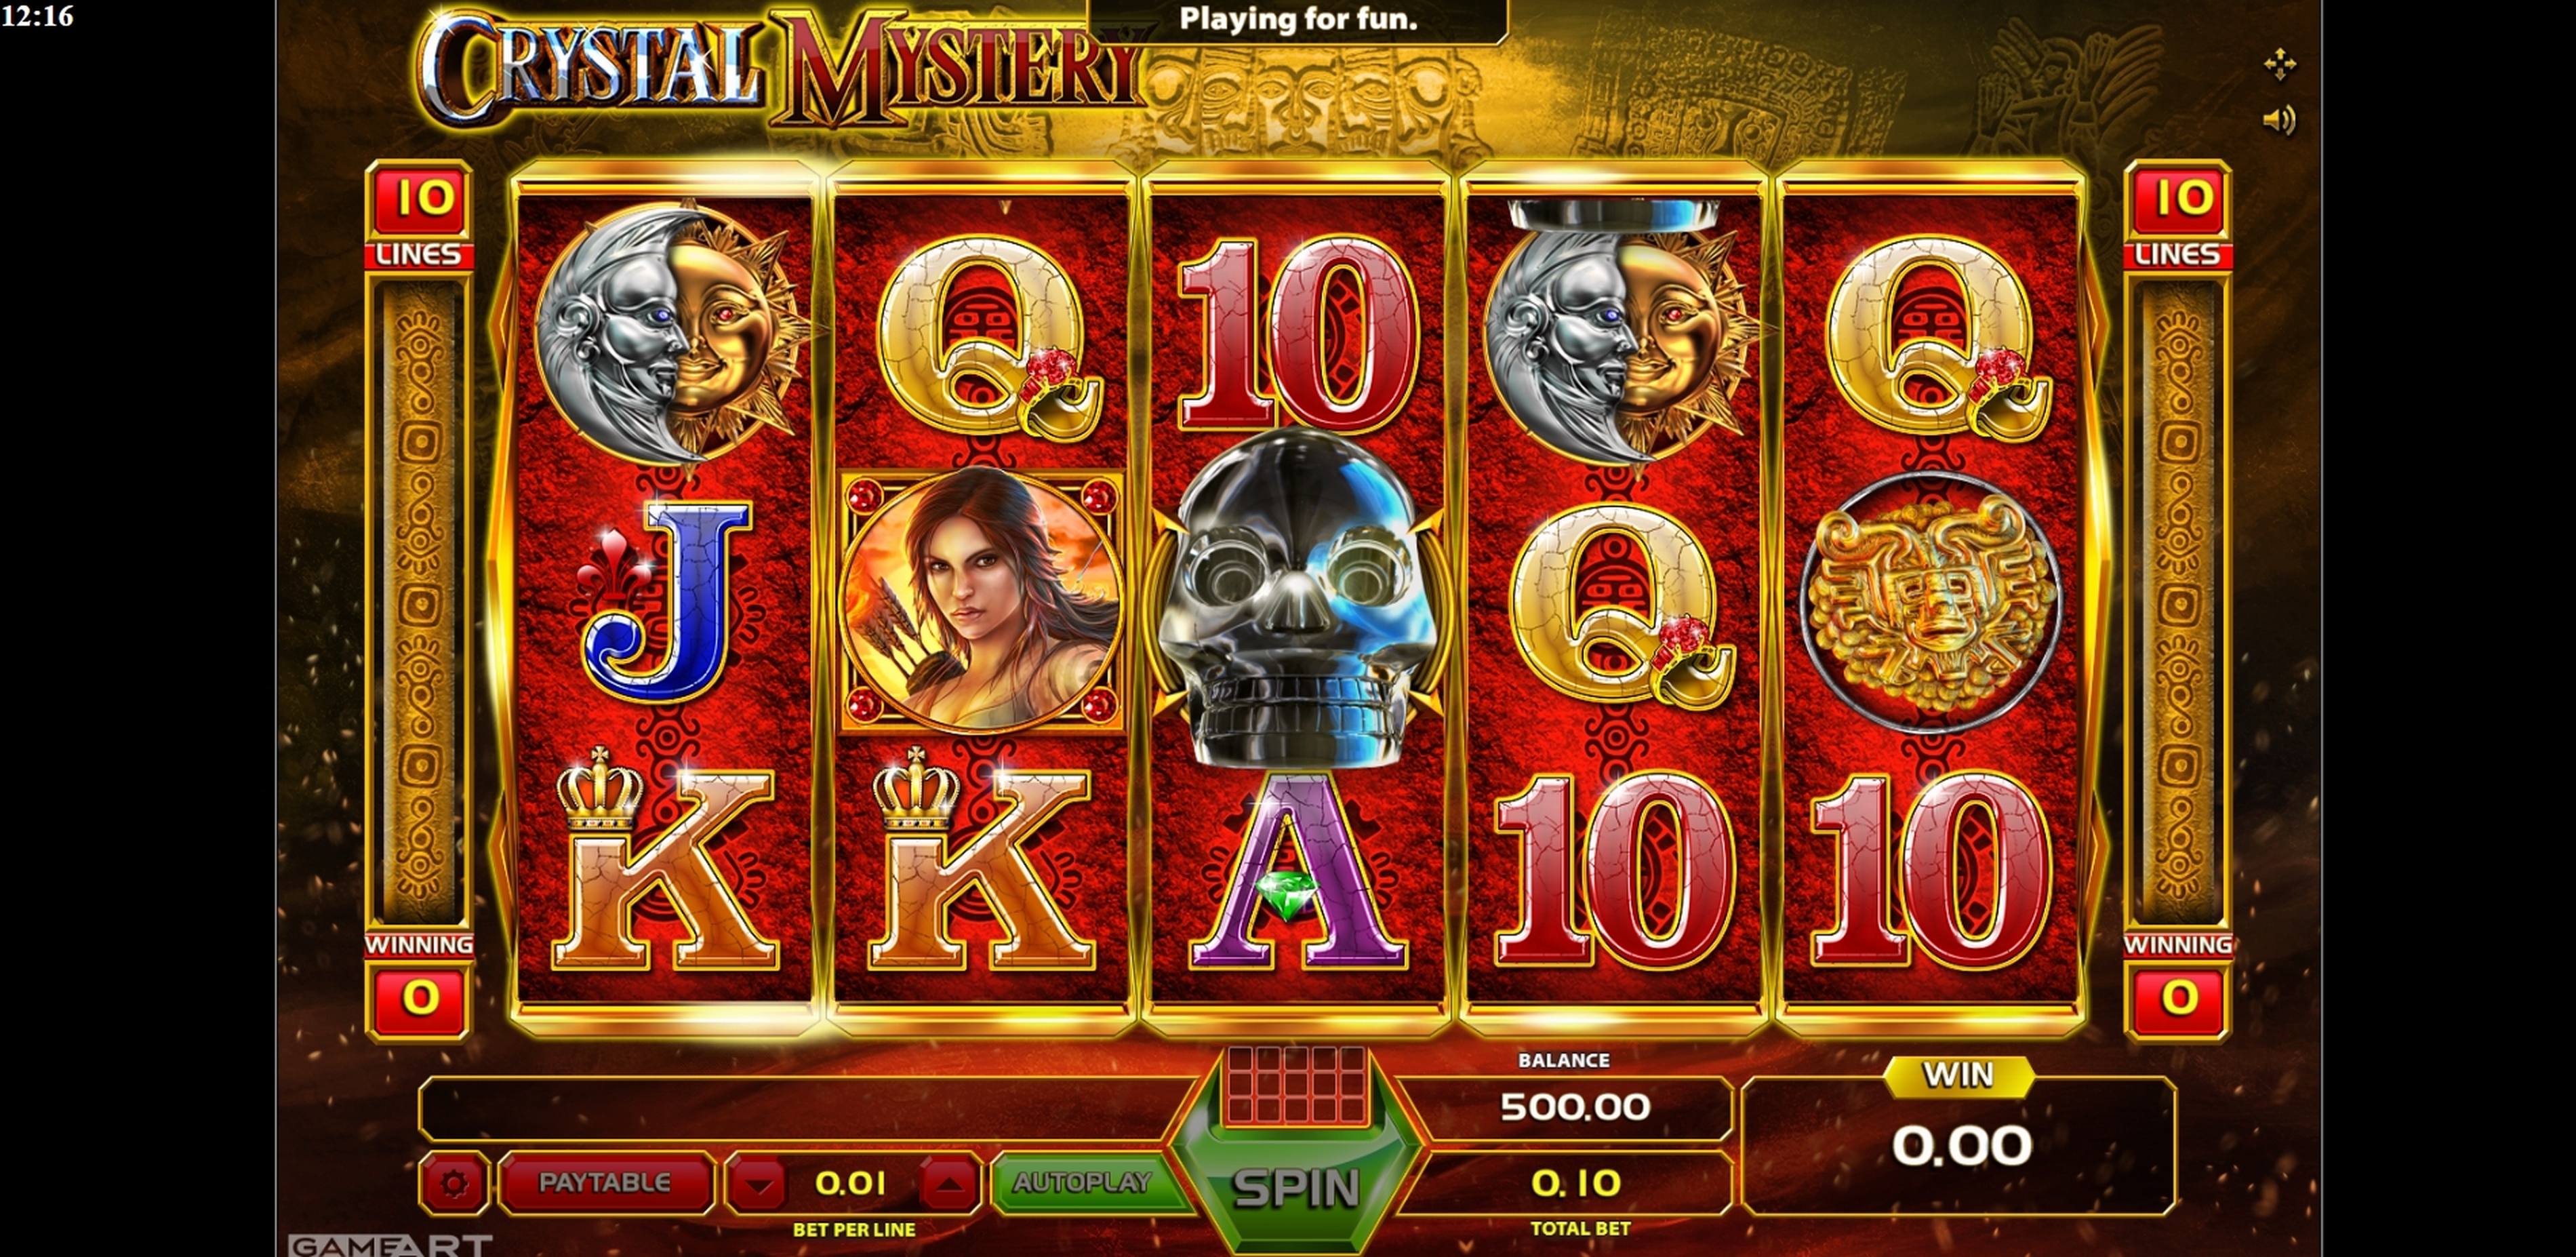 Reels in Crystal Mystery Slot Game by GameArt